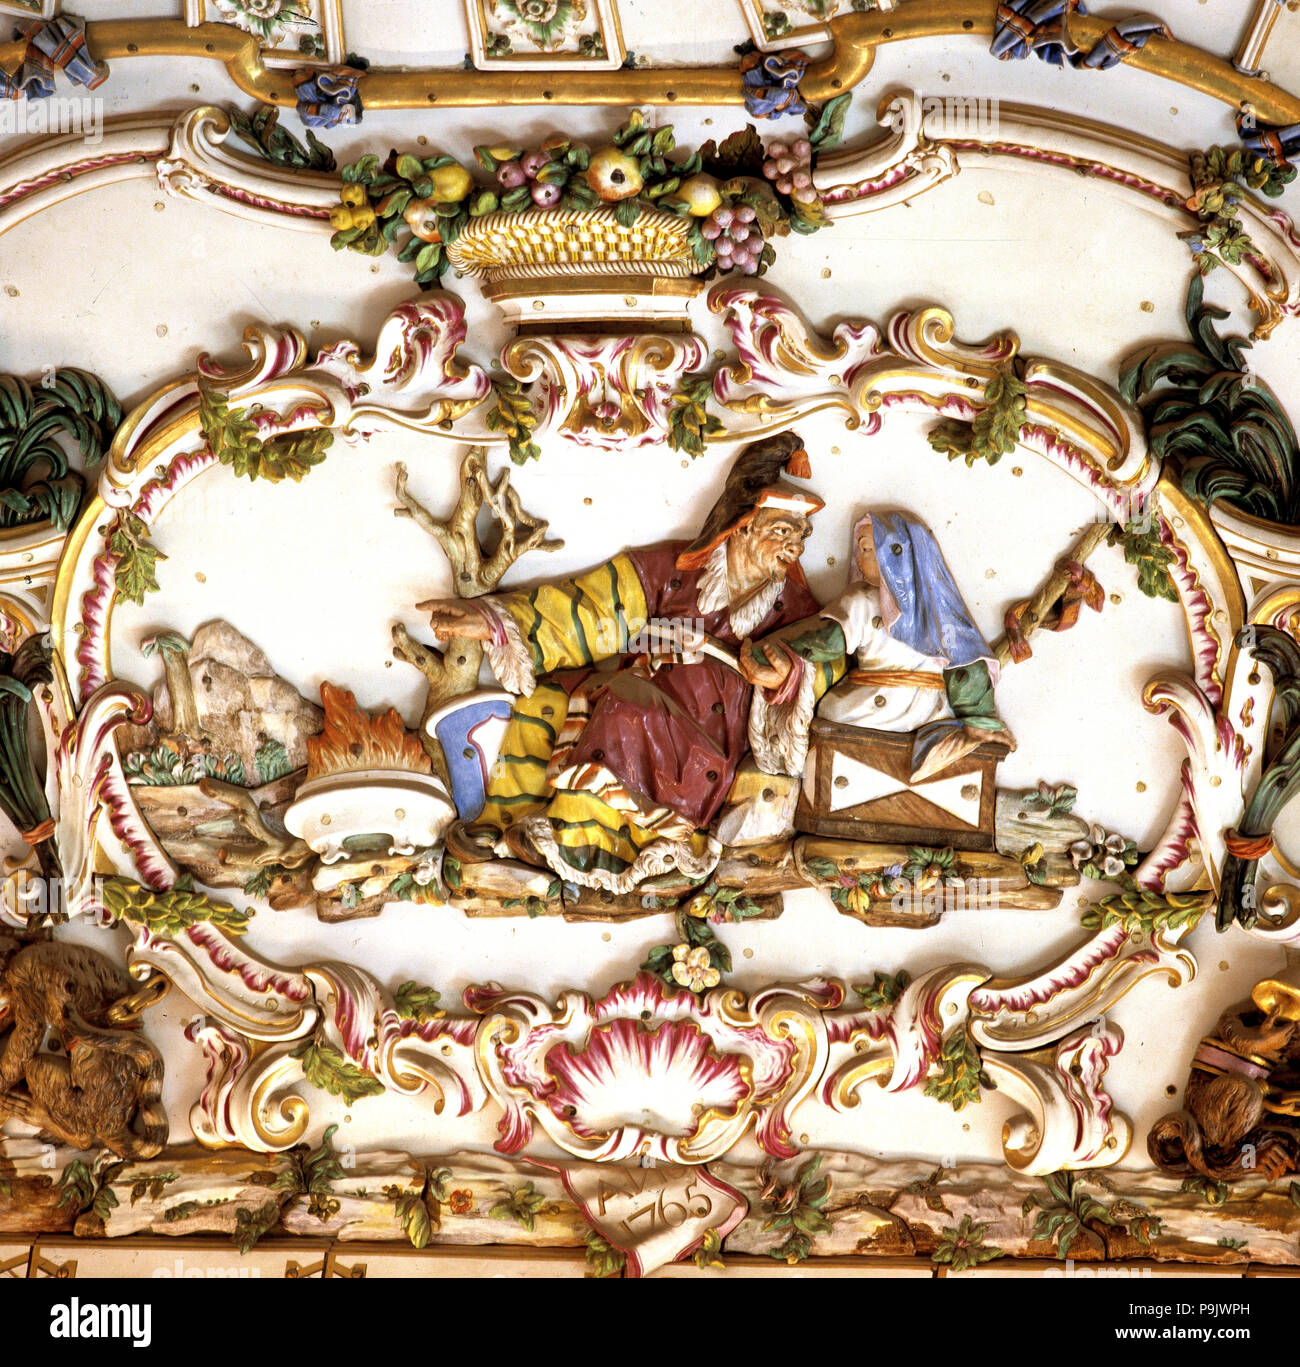 Royal Palace of Aranjuez, detail of the decoration of the porcelain room. Stock Photo